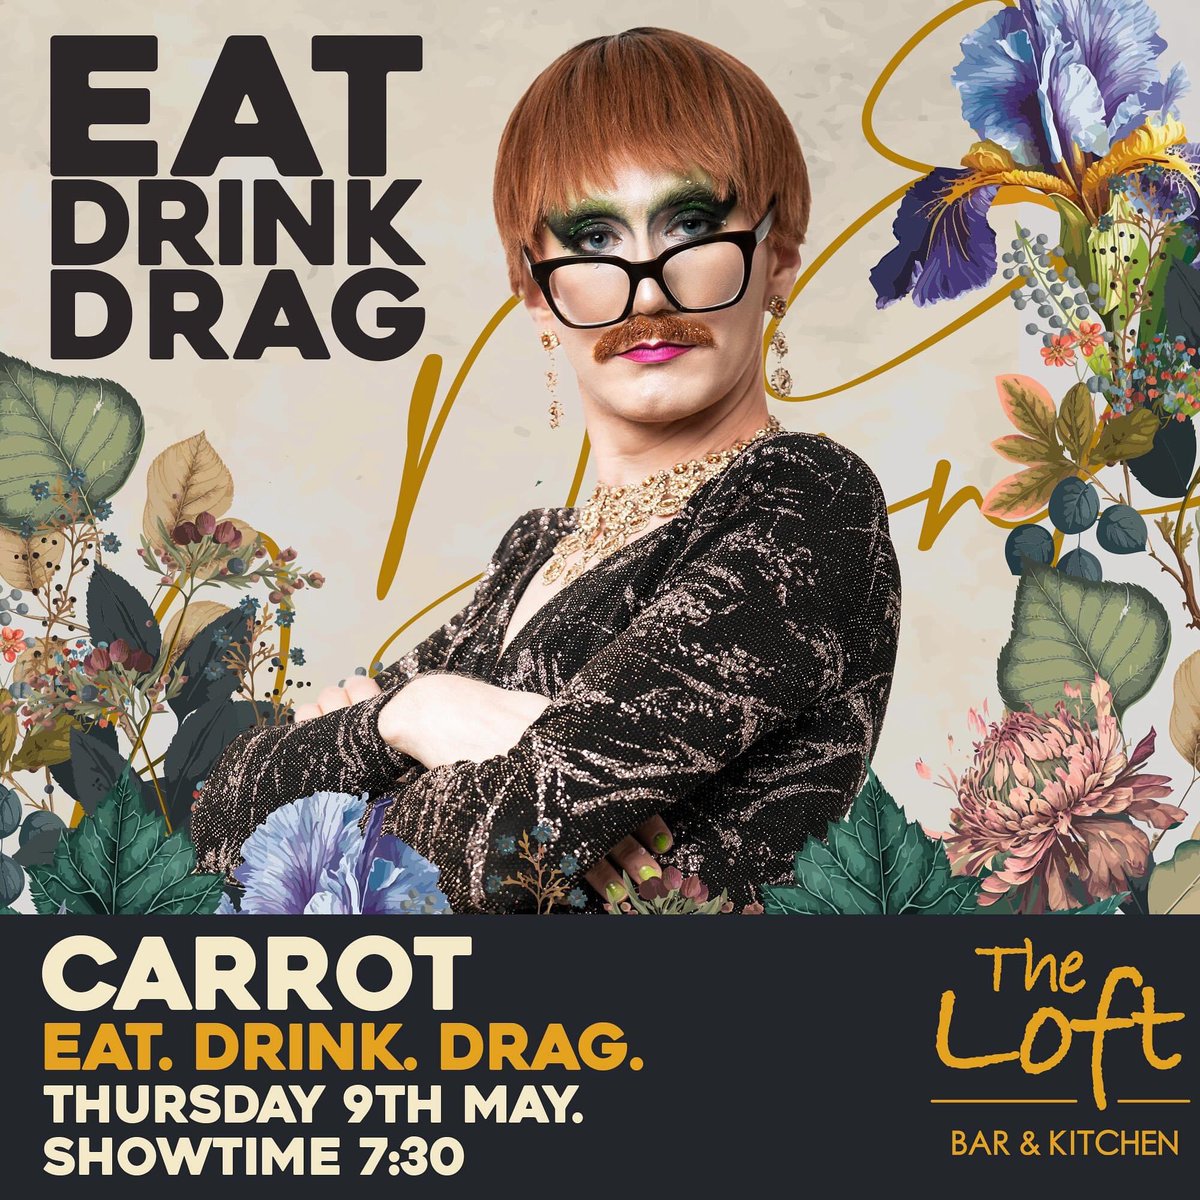 EAT DRINK AND DRAG IN THE SUNSHINE ☀️ 👠 It’s Thursday Club alfresco TONIGHT at @TheLoftBrum! We will swing open the bifold doors and sing in the sun for another Eat, Drink, Drag! The fabulous @CarrotDrag will be LIVE with us 7.30pm with TWO COCKTAILS for £12!